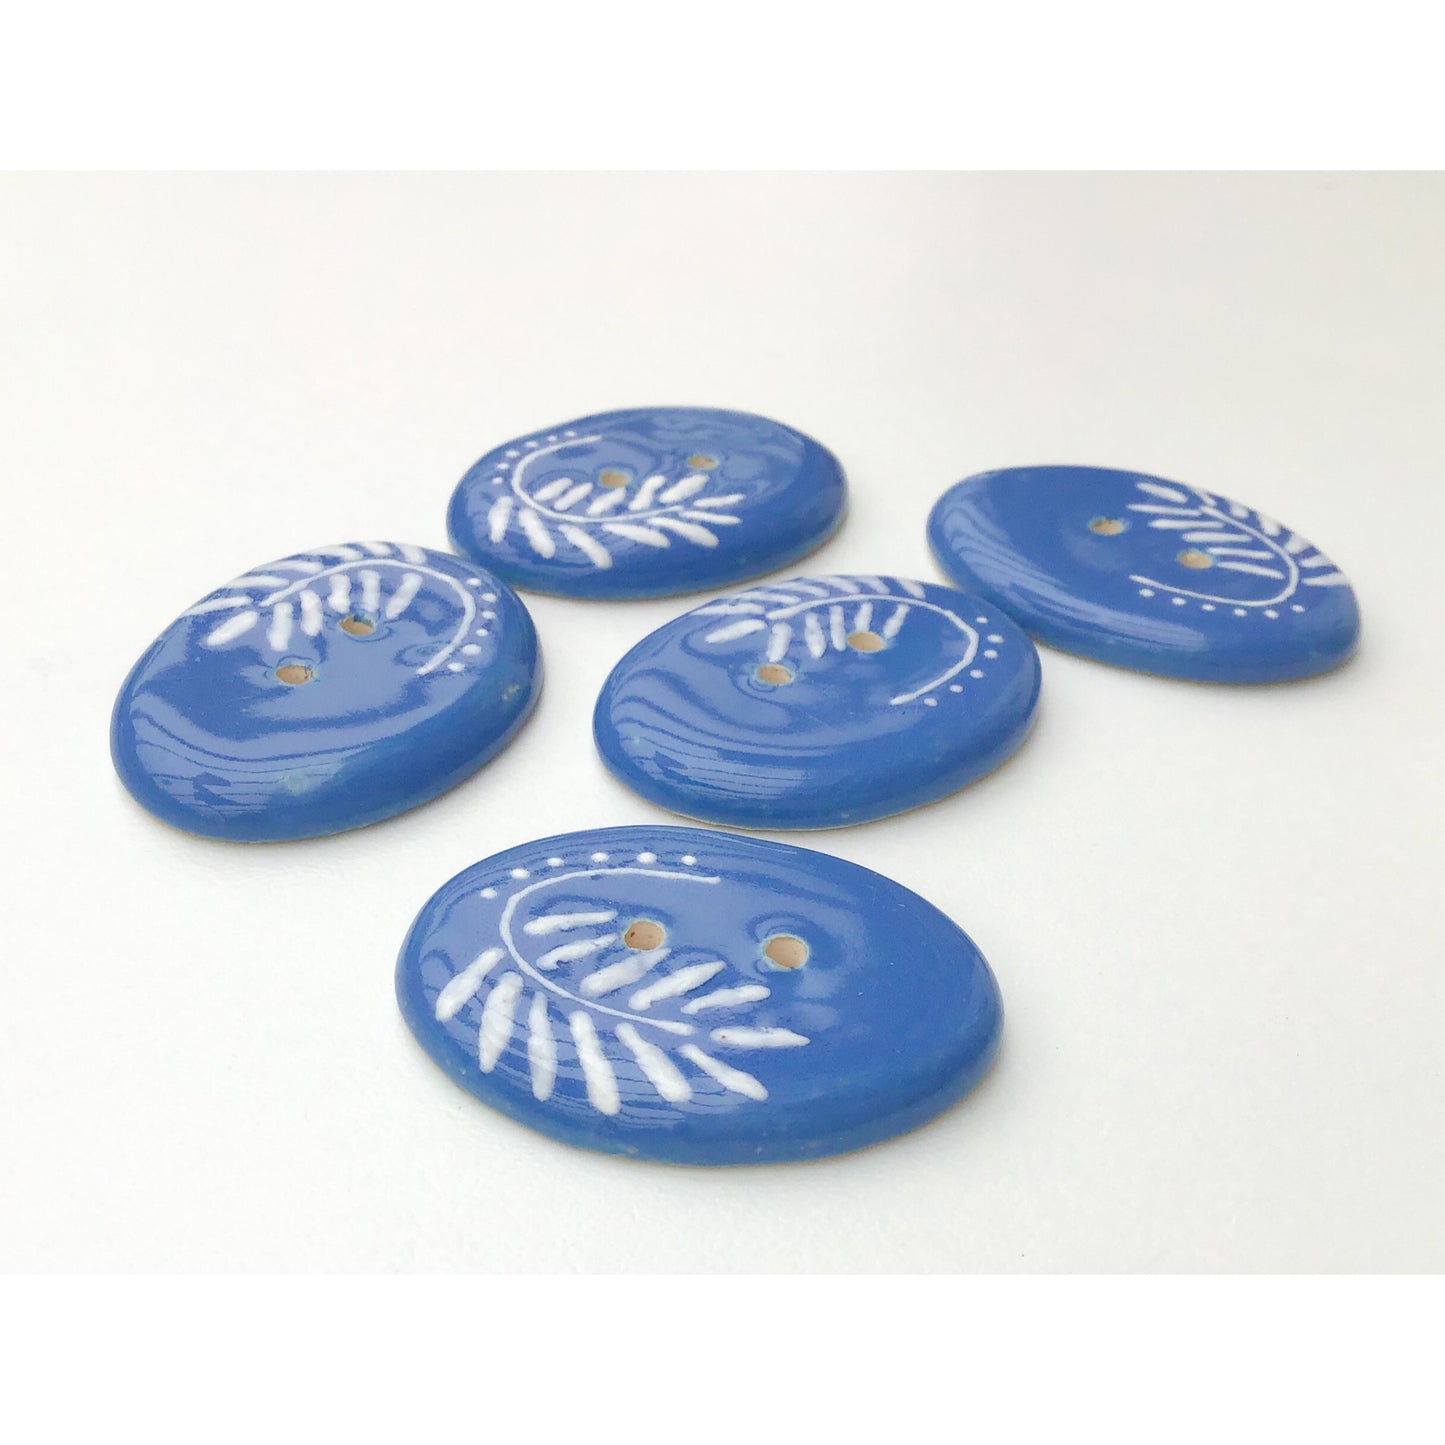 Cerulean Blue Ceramic Buttons with White Design - Large Oval Button - 1" x 1 3/8" (ws-41)